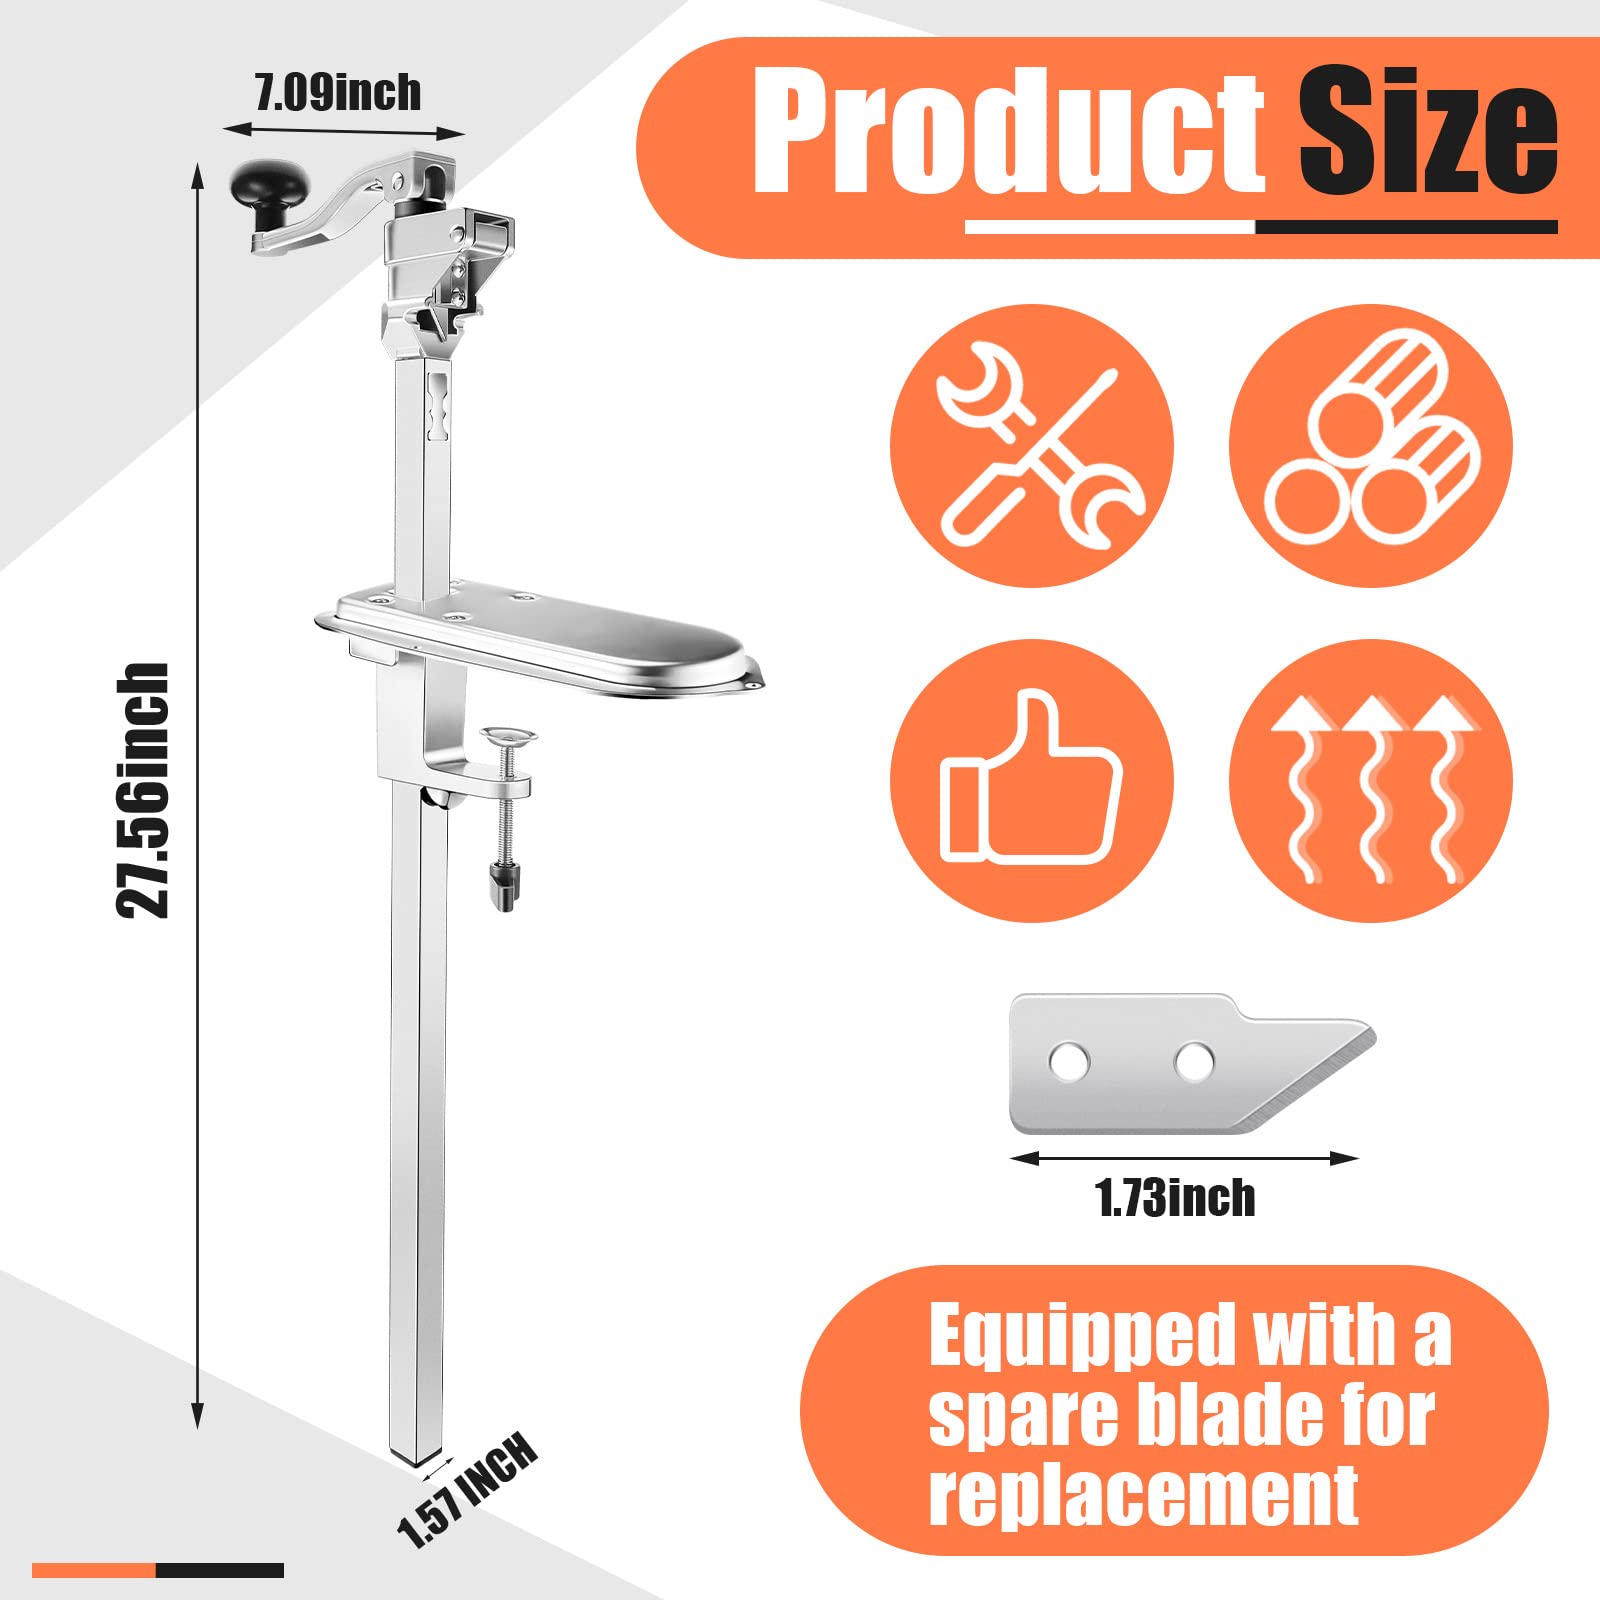 Manual Table Can Opener Commercial Can Opener Heavy Duty Professional Industrial Can Opener for Big Cans with Plated Steel Base and Stainless Steel Blade for Cans up to 17 Inch Tall Kitchen Restaurant